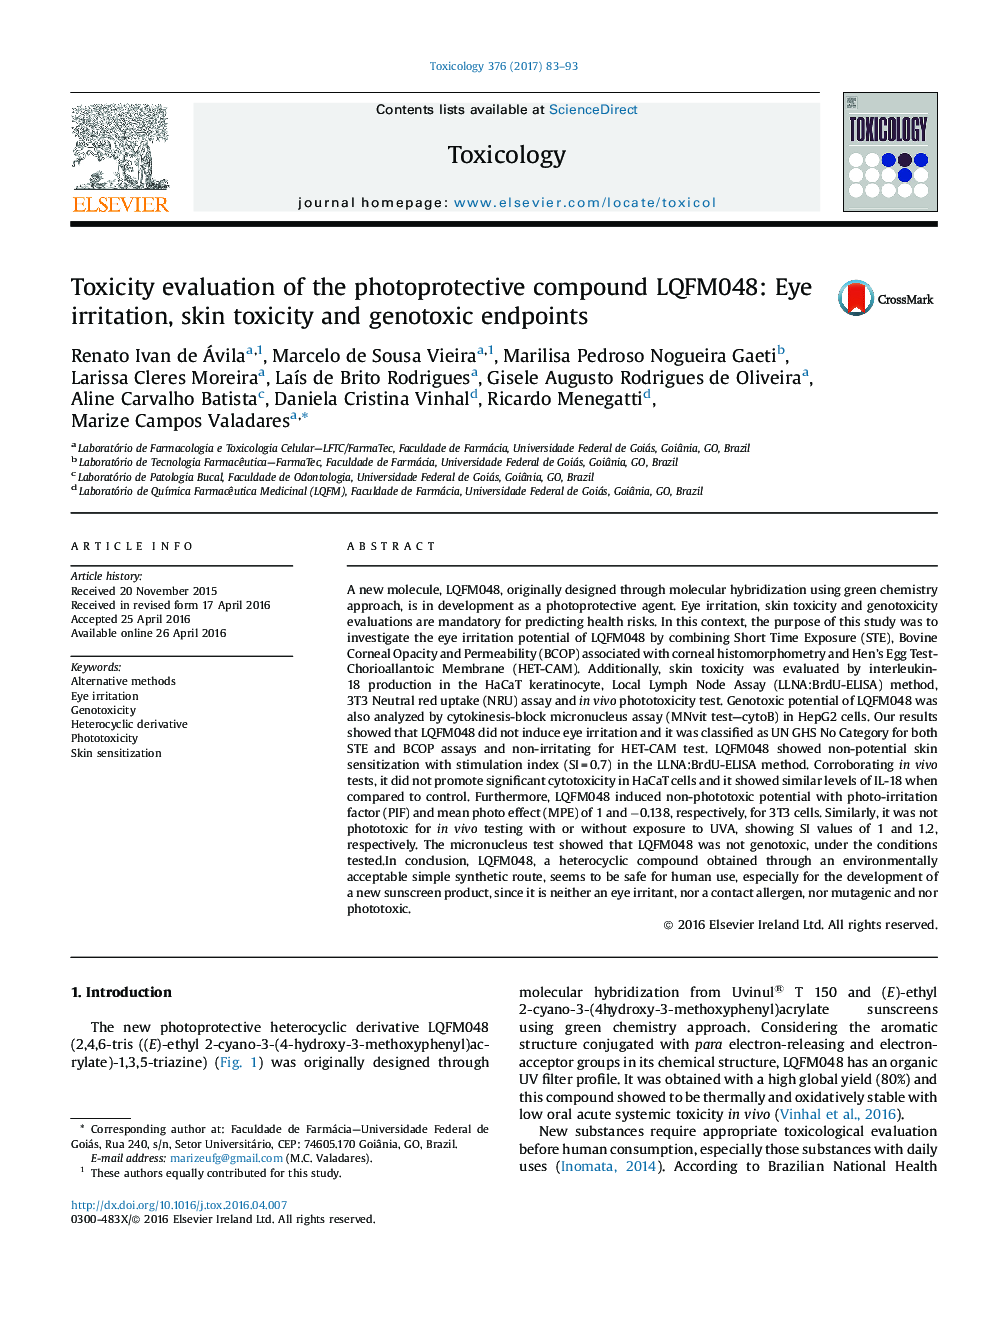 Toxicity evaluation of the photoprotective compound LQFM048: Eye irritation, skin toxicity and genotoxic endpoints